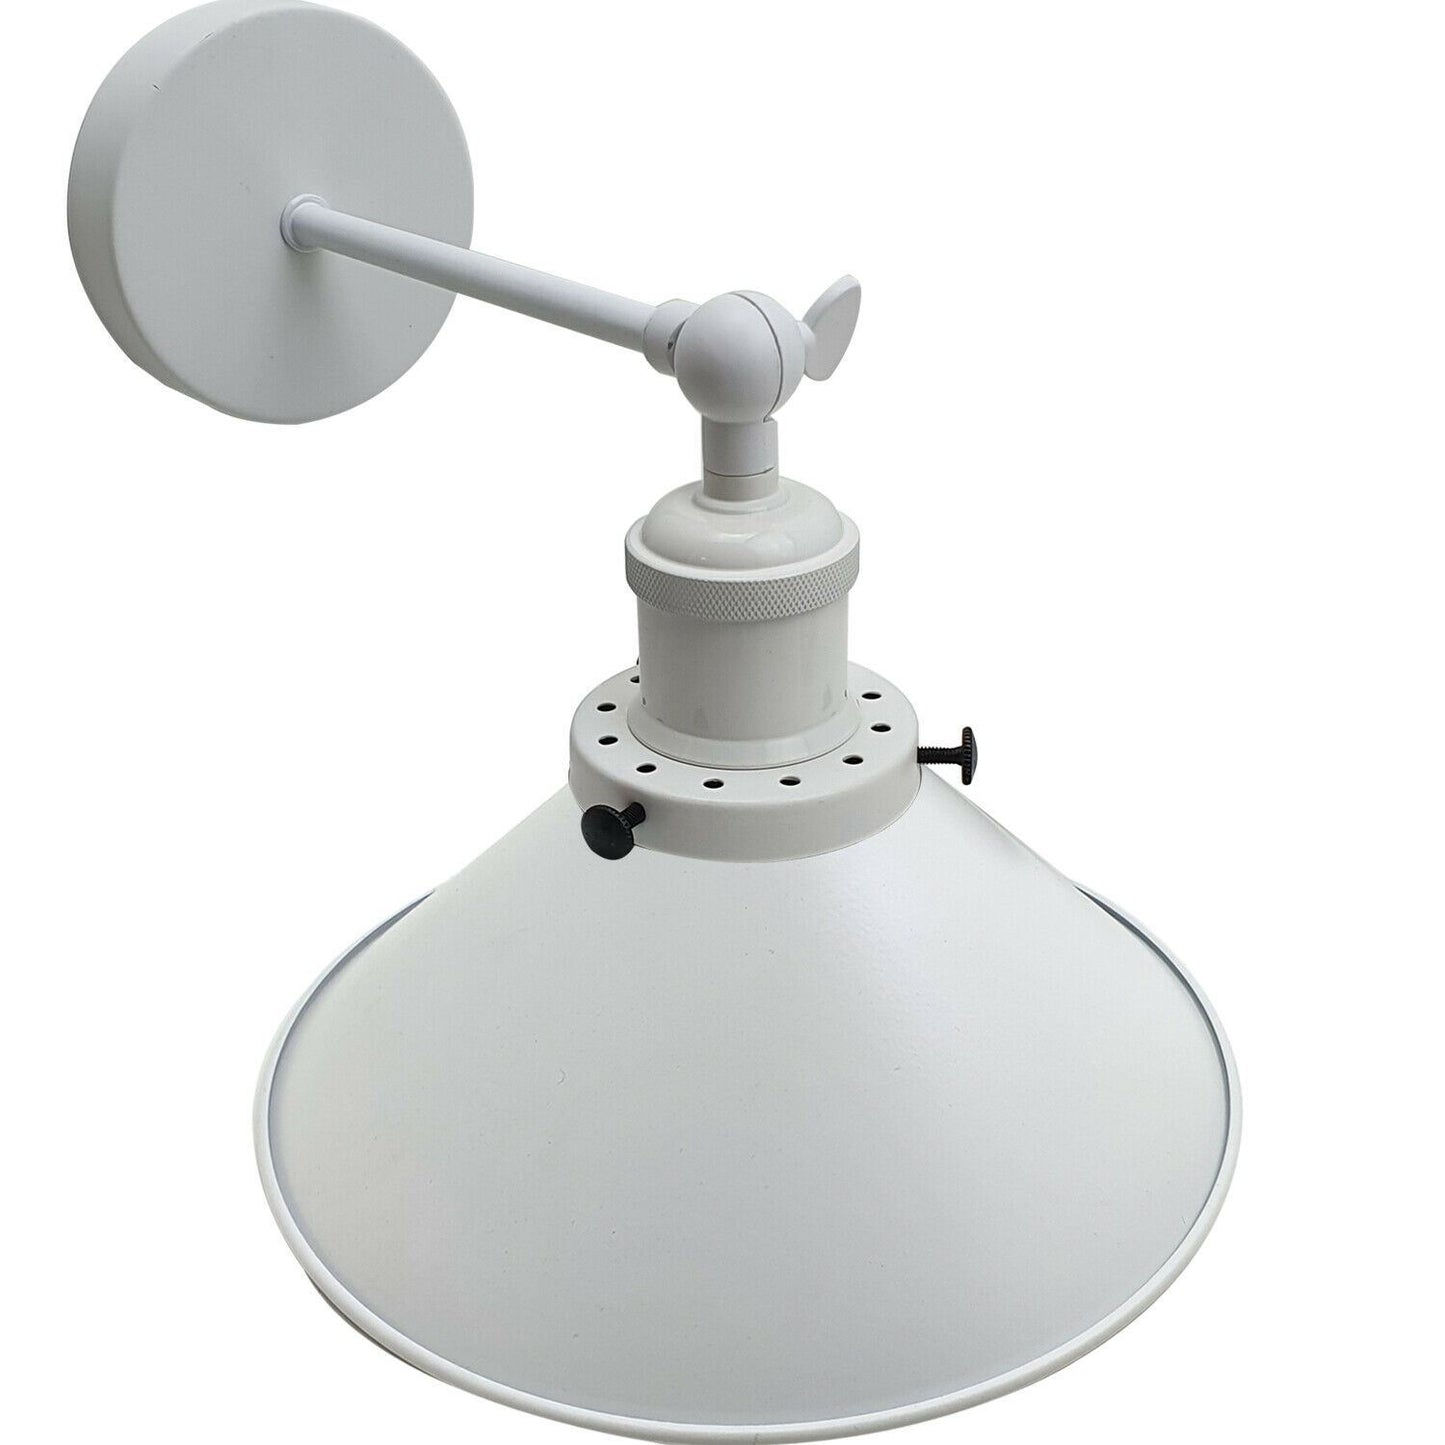 Vintage Adjustable White Cone Shade E27 Socket shade, Plug-in Switch